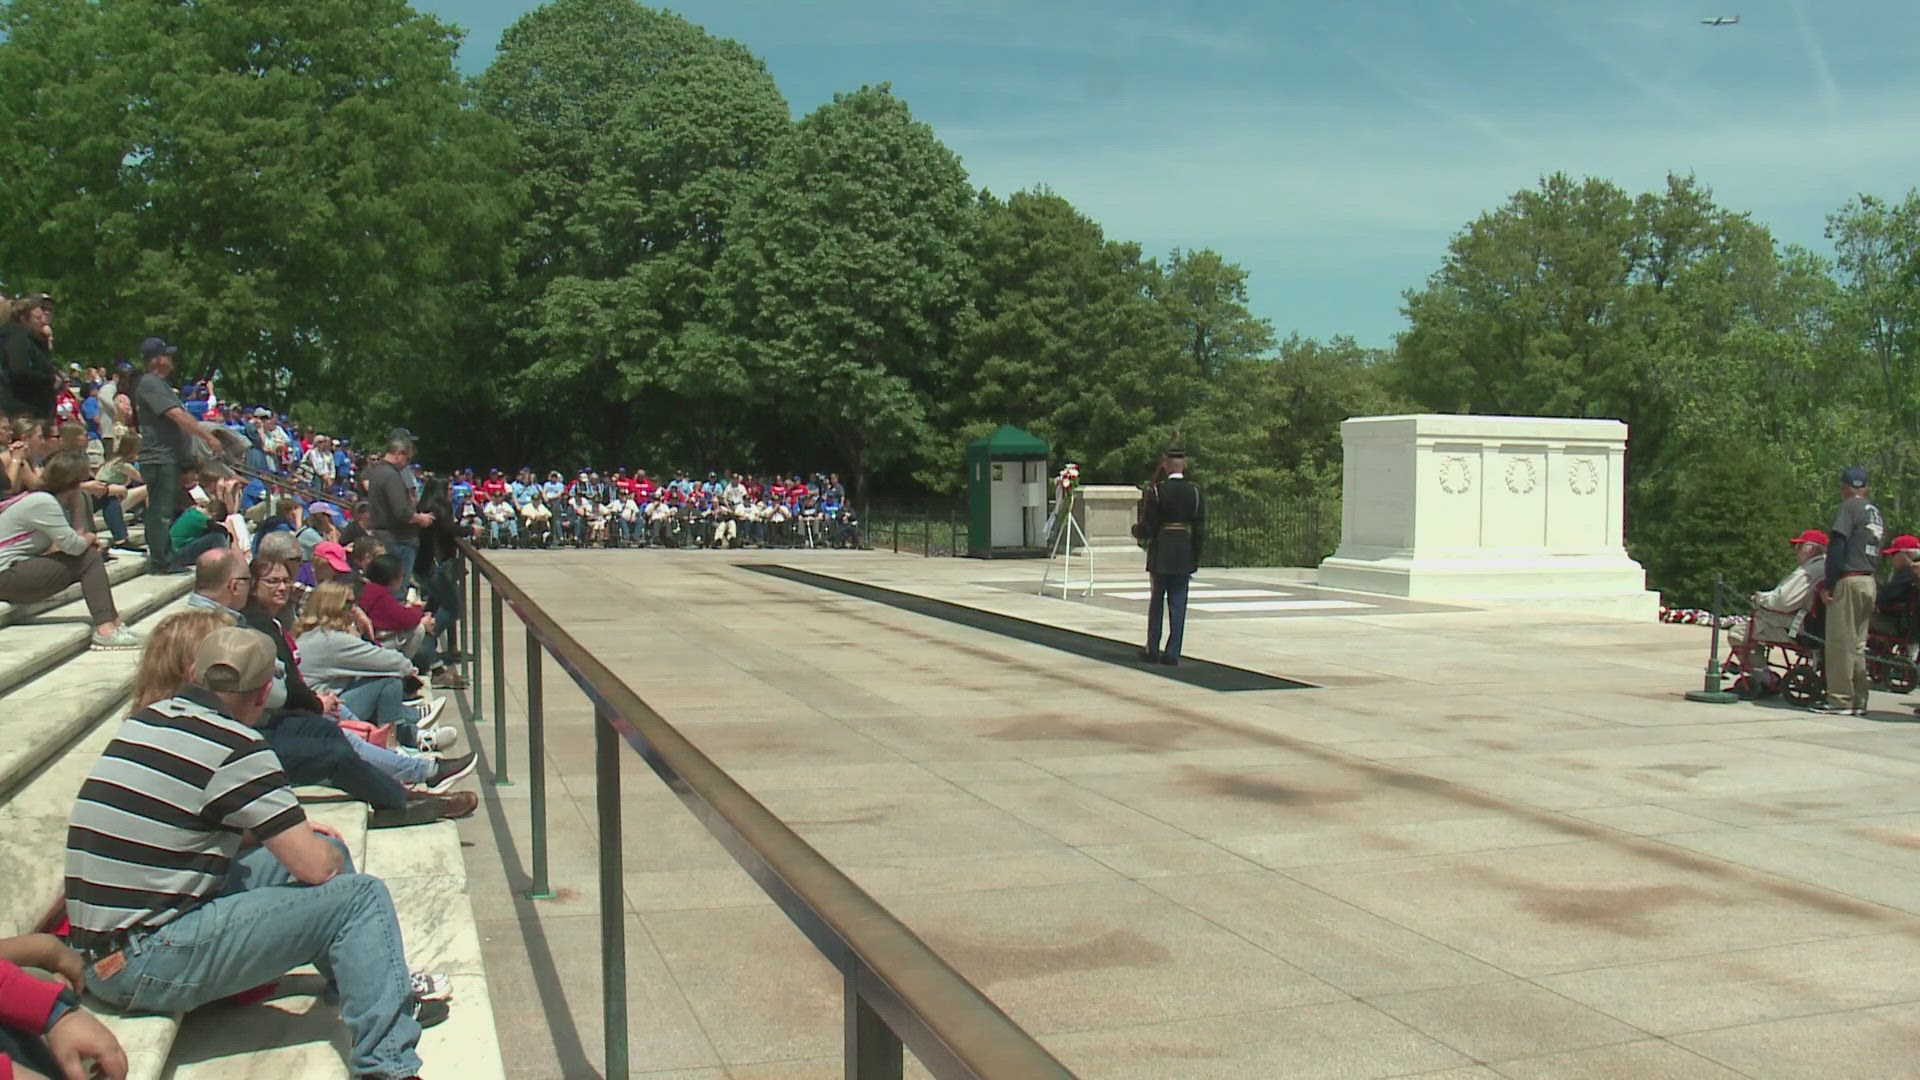 Scarborough police Chief Mark Holmquist was part of a special unit in the Army, the sentinels who guard the Tomb of the Unknown Soldier.